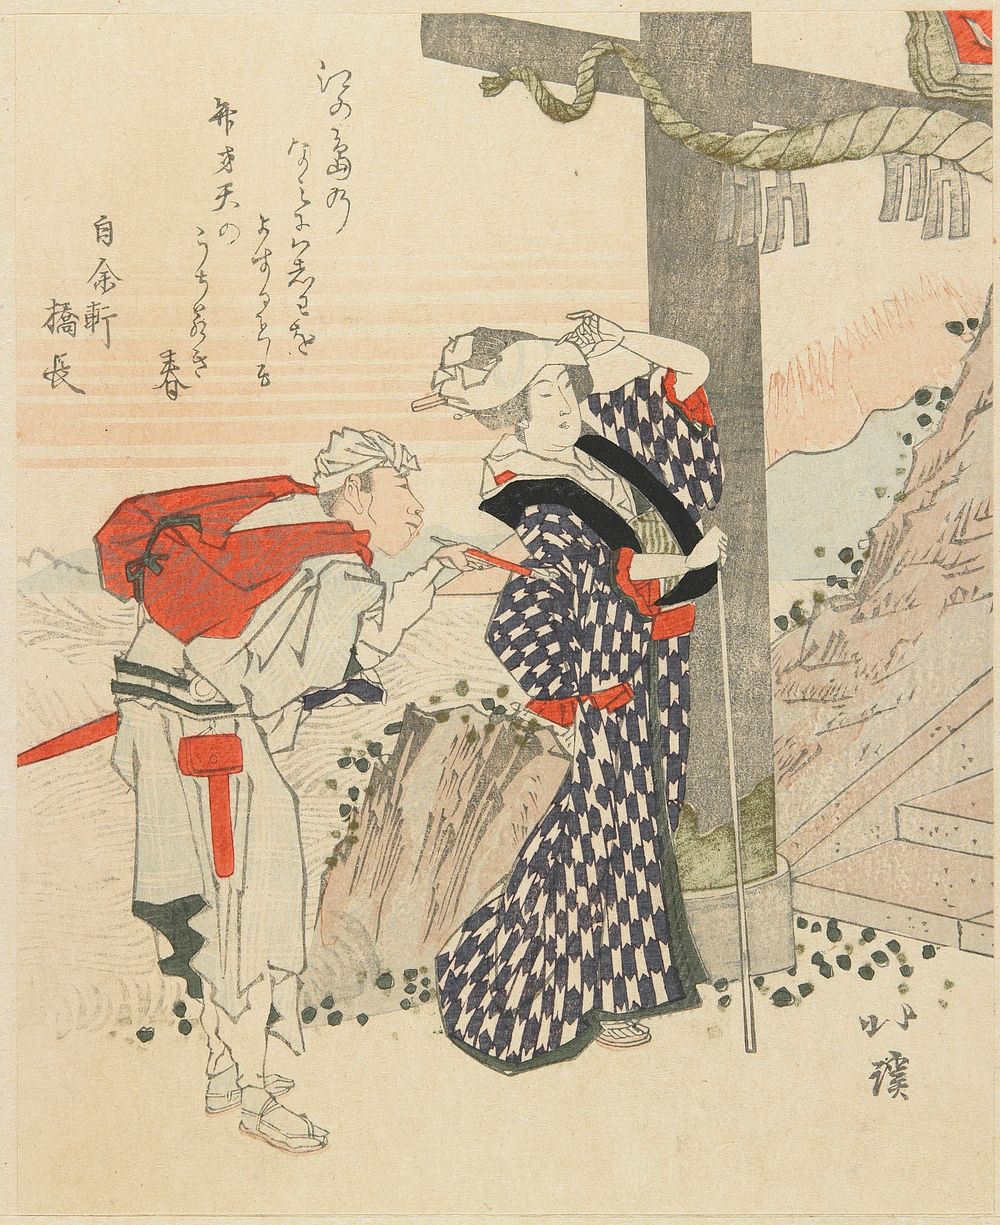 Woman and Man at Entrance Gate of Enoshima. Original from the Minneapolis Institute of Art.